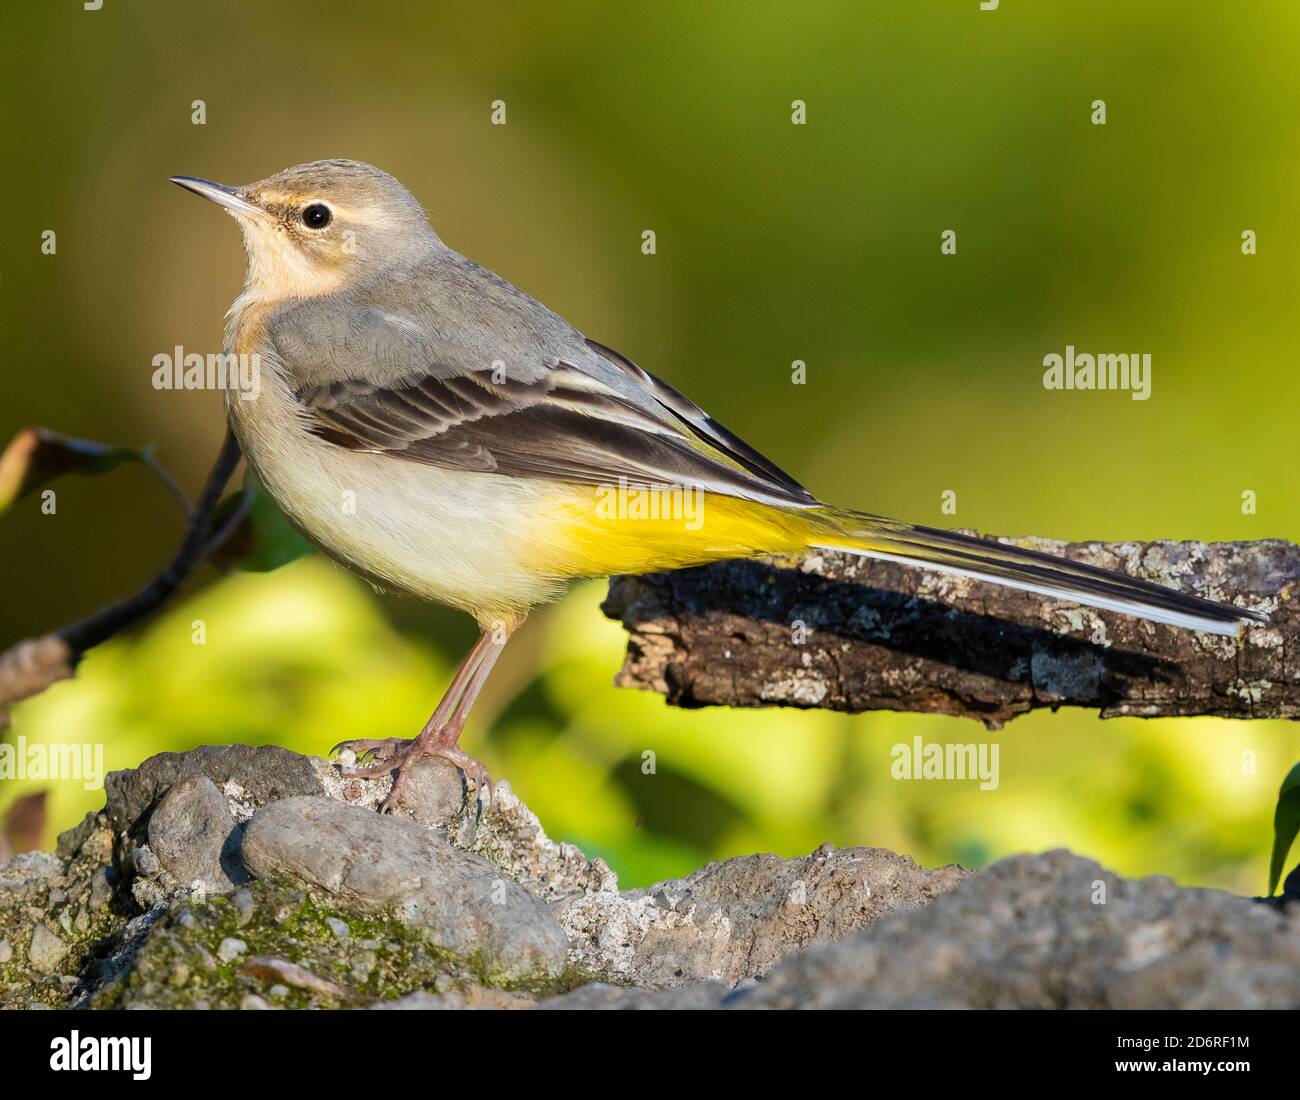 grey wagtail (Motacilla cinerea), adult in winter plumage standing on a rock, Italy, Campania Stock Photo